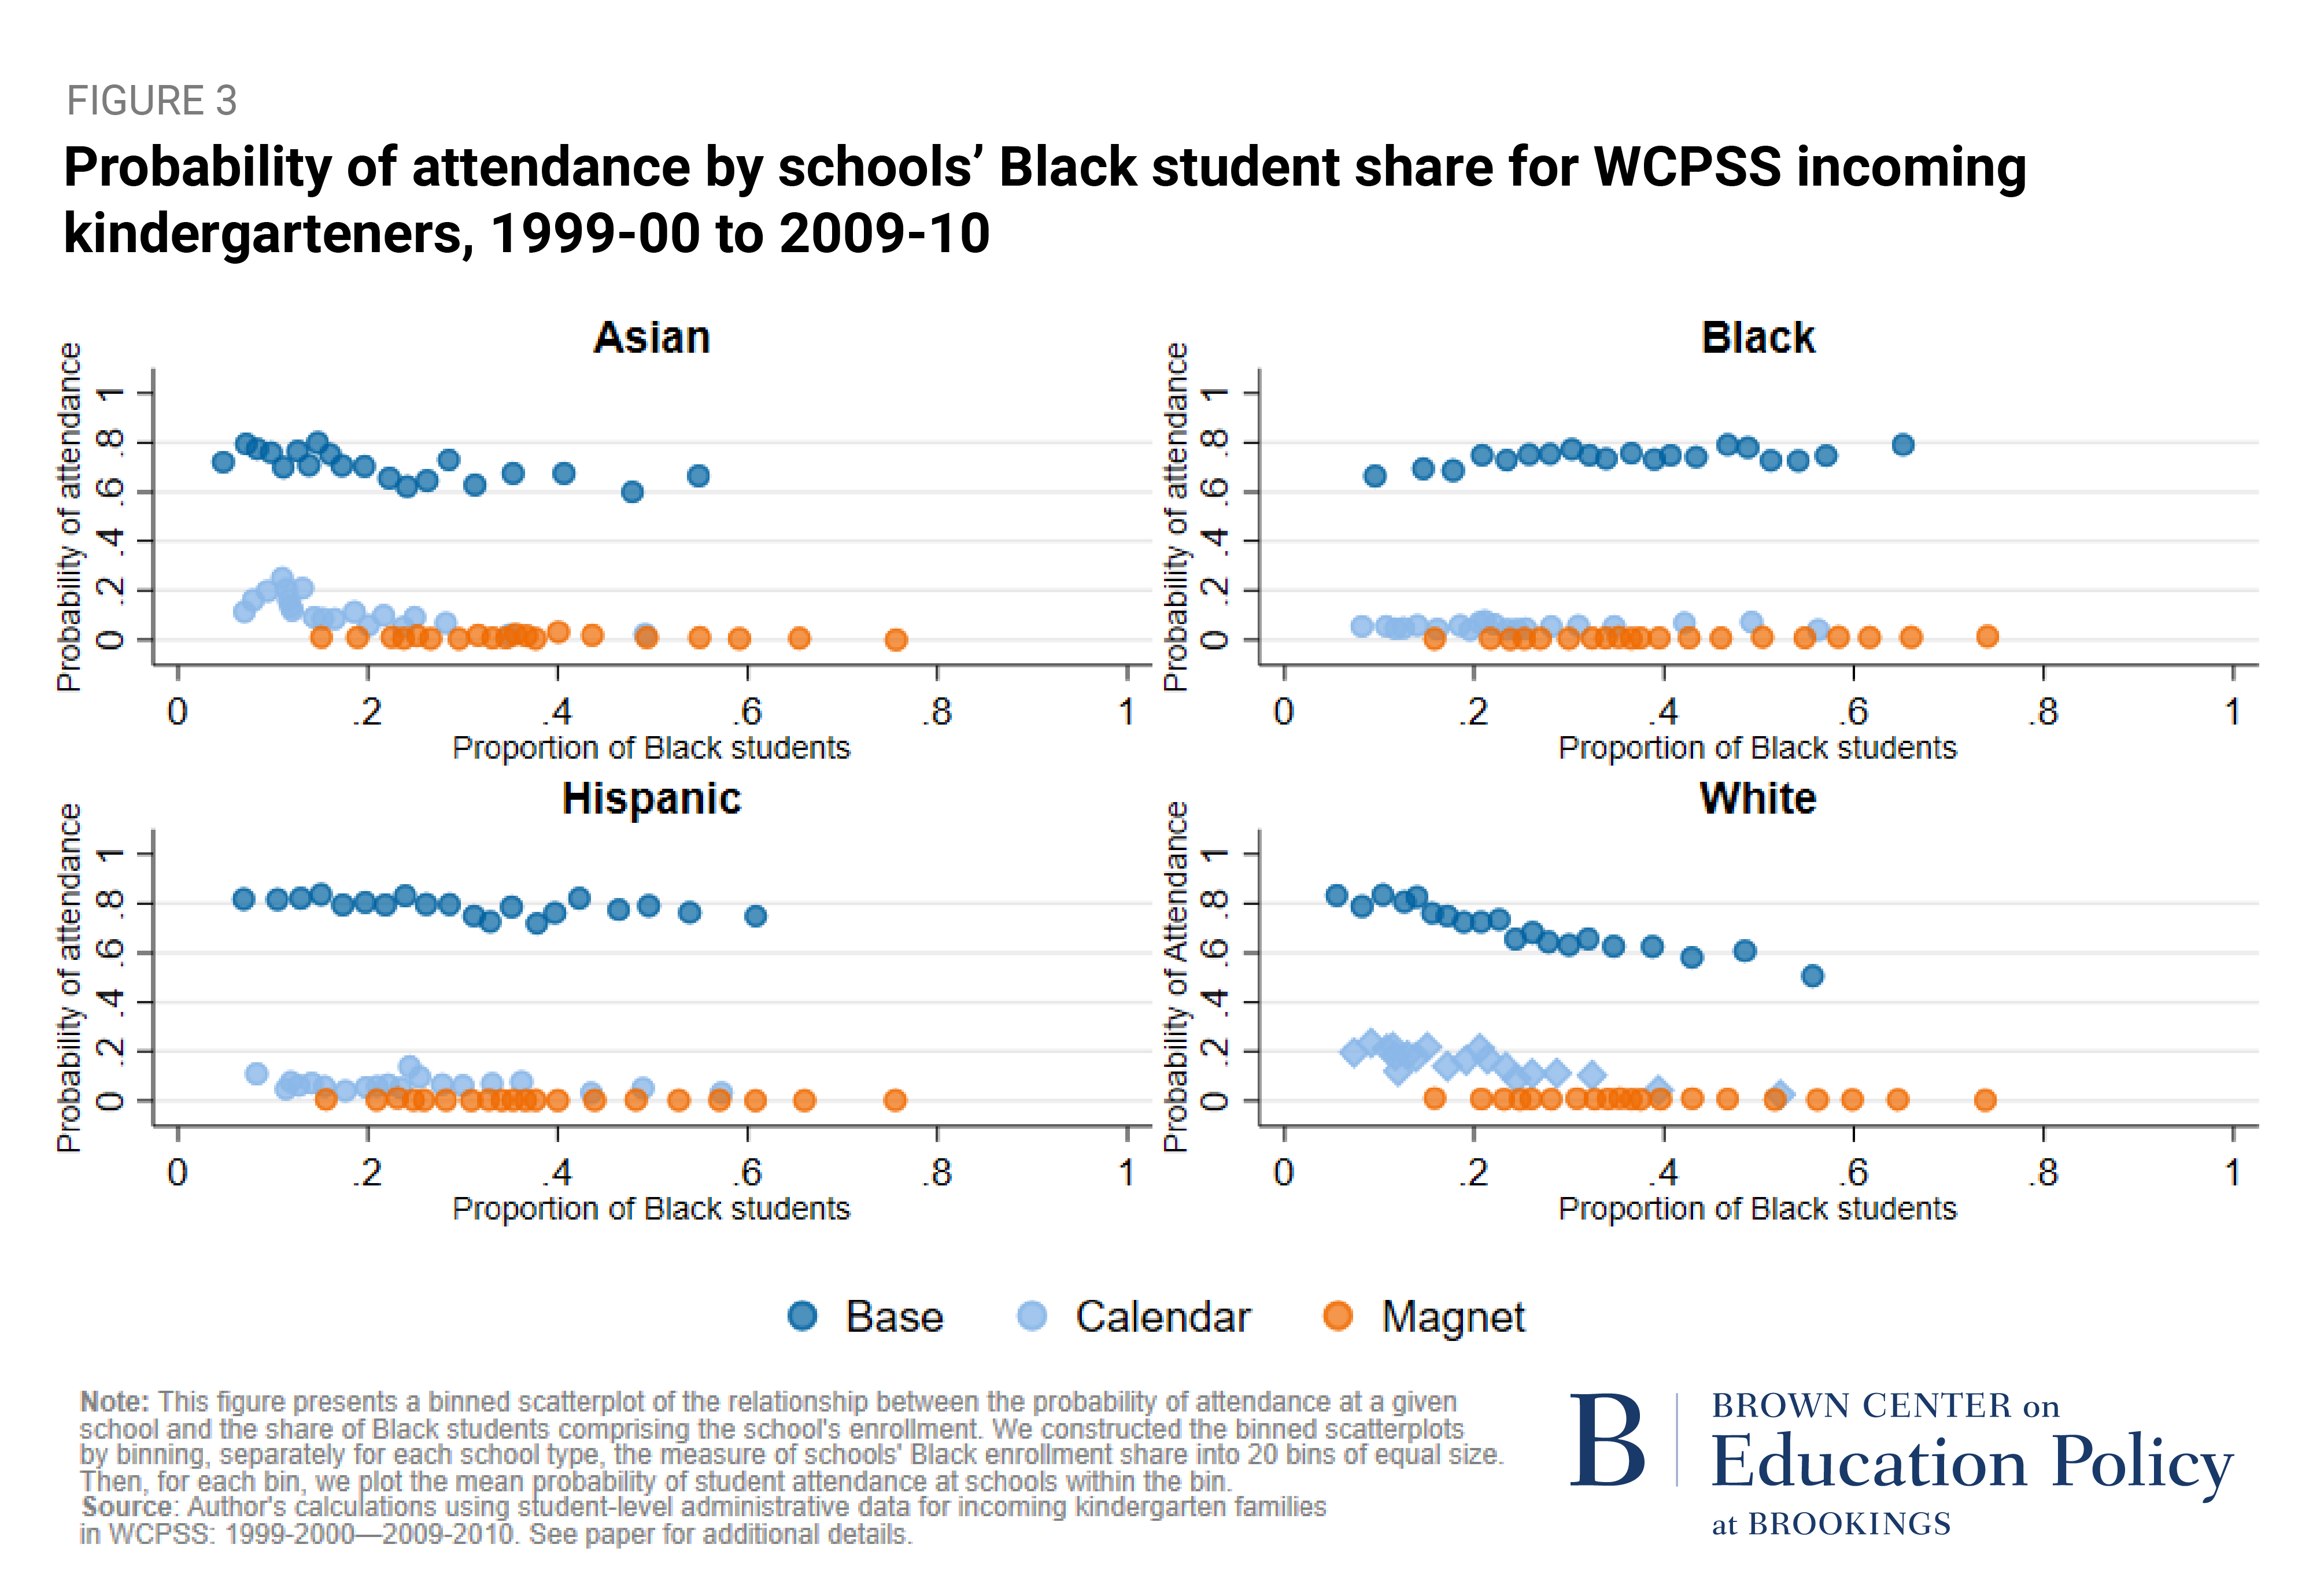 Probability of attendance by schools' Black student share for WCPSS incoming kindergarteners, 1999-00 to 2009-10